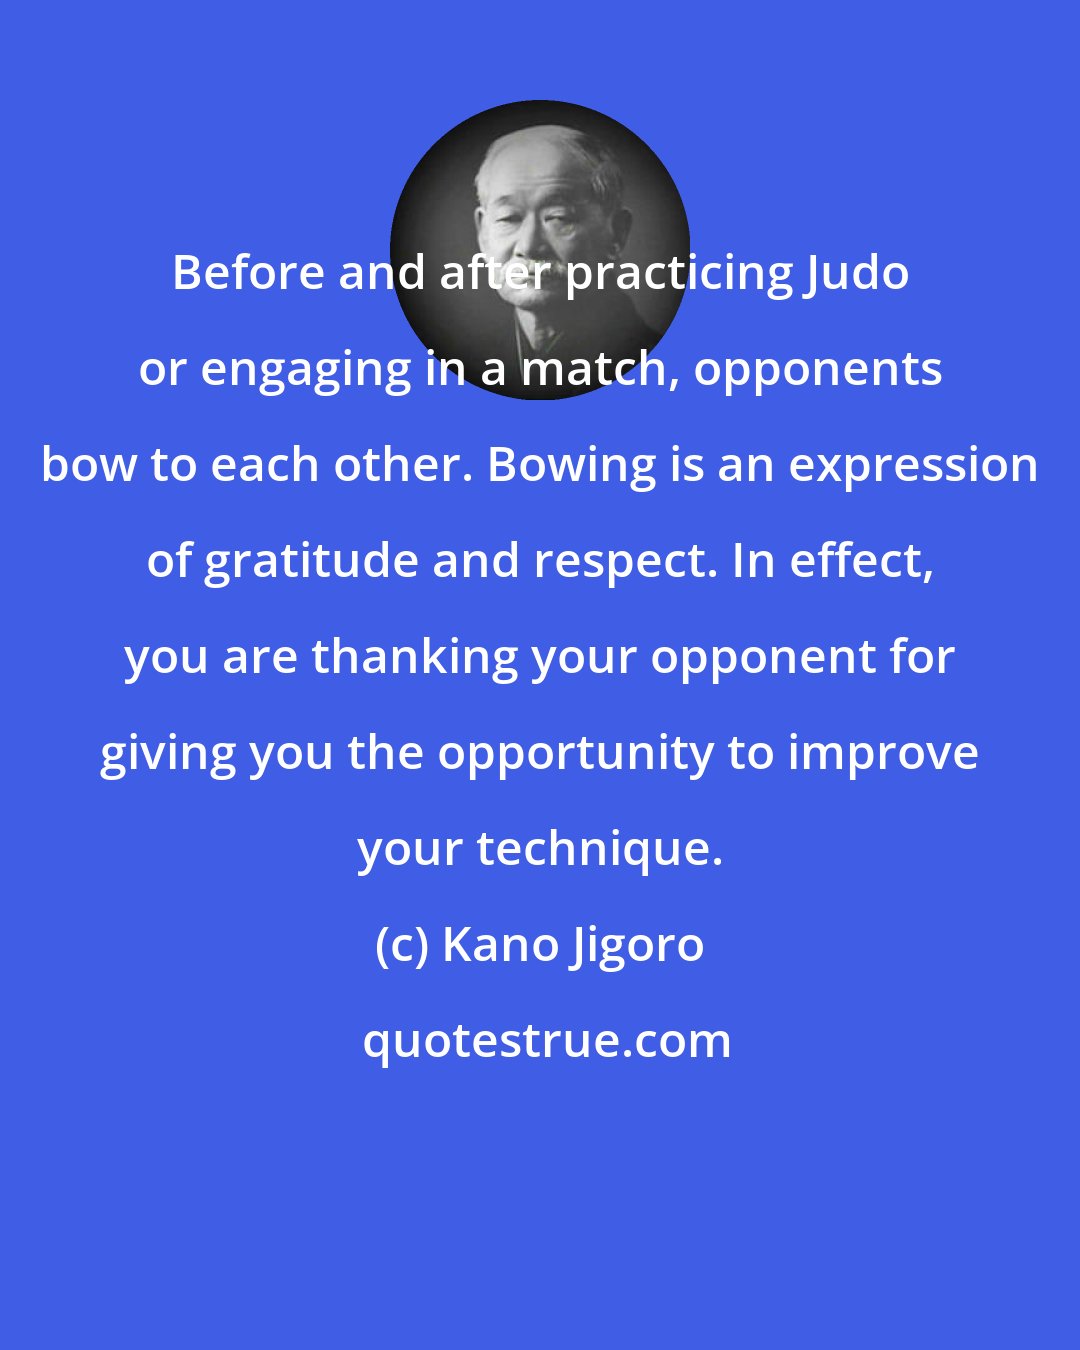 Kano Jigoro: Before and after practicing Judo or engaging in a match, opponents bow to each other. Bowing is an expression of gratitude and respect. In effect, you are thanking your opponent for giving you the opportunity to improve your technique.